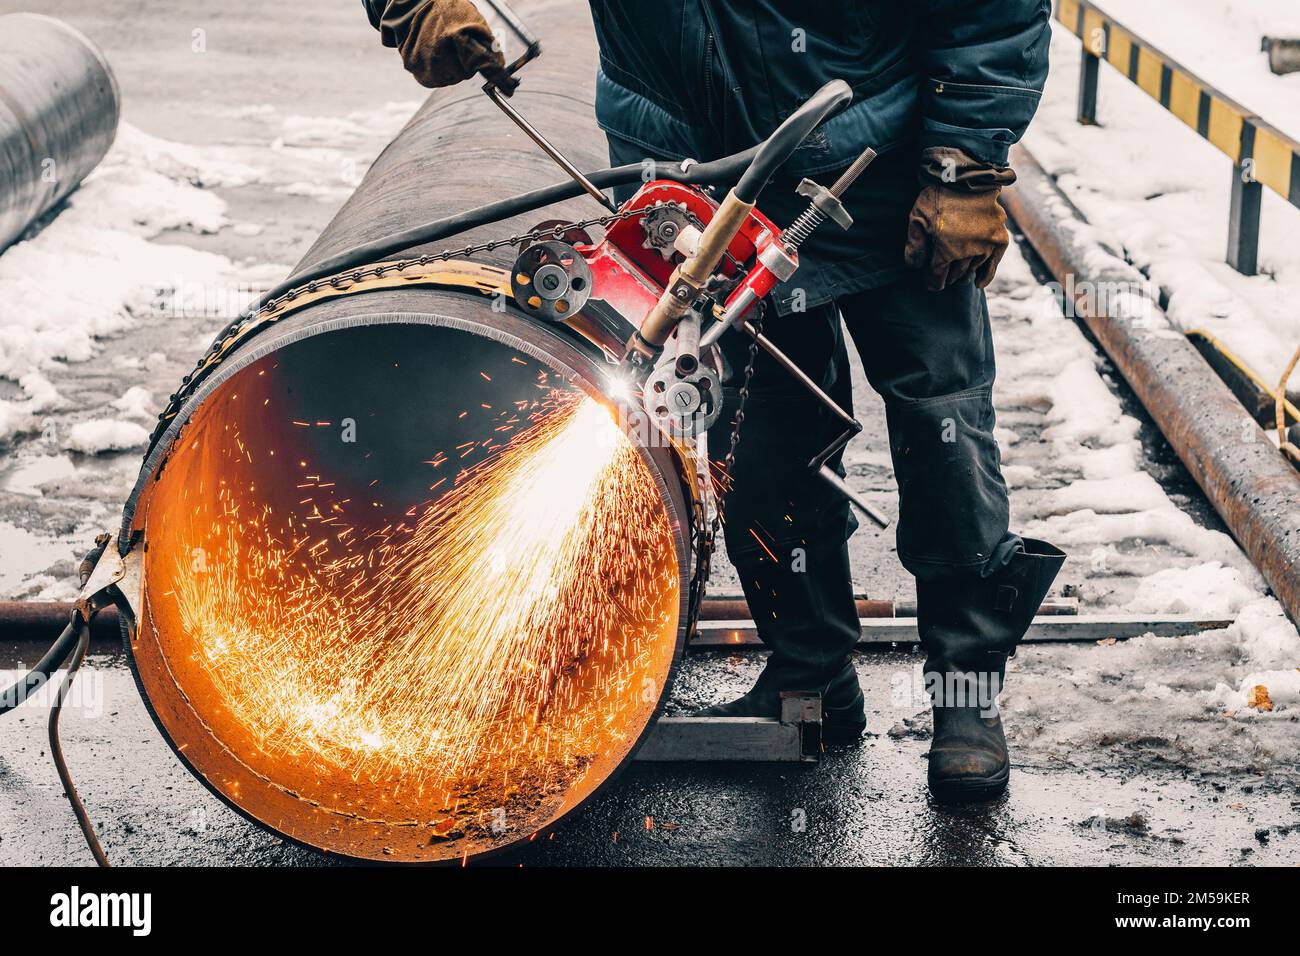 Working welder cuts metal and sparks fly. Gas cutting of large diameter pipes with acetylene and oxygen. Industrial metal cutting in oil and gas industry. Stock Photo